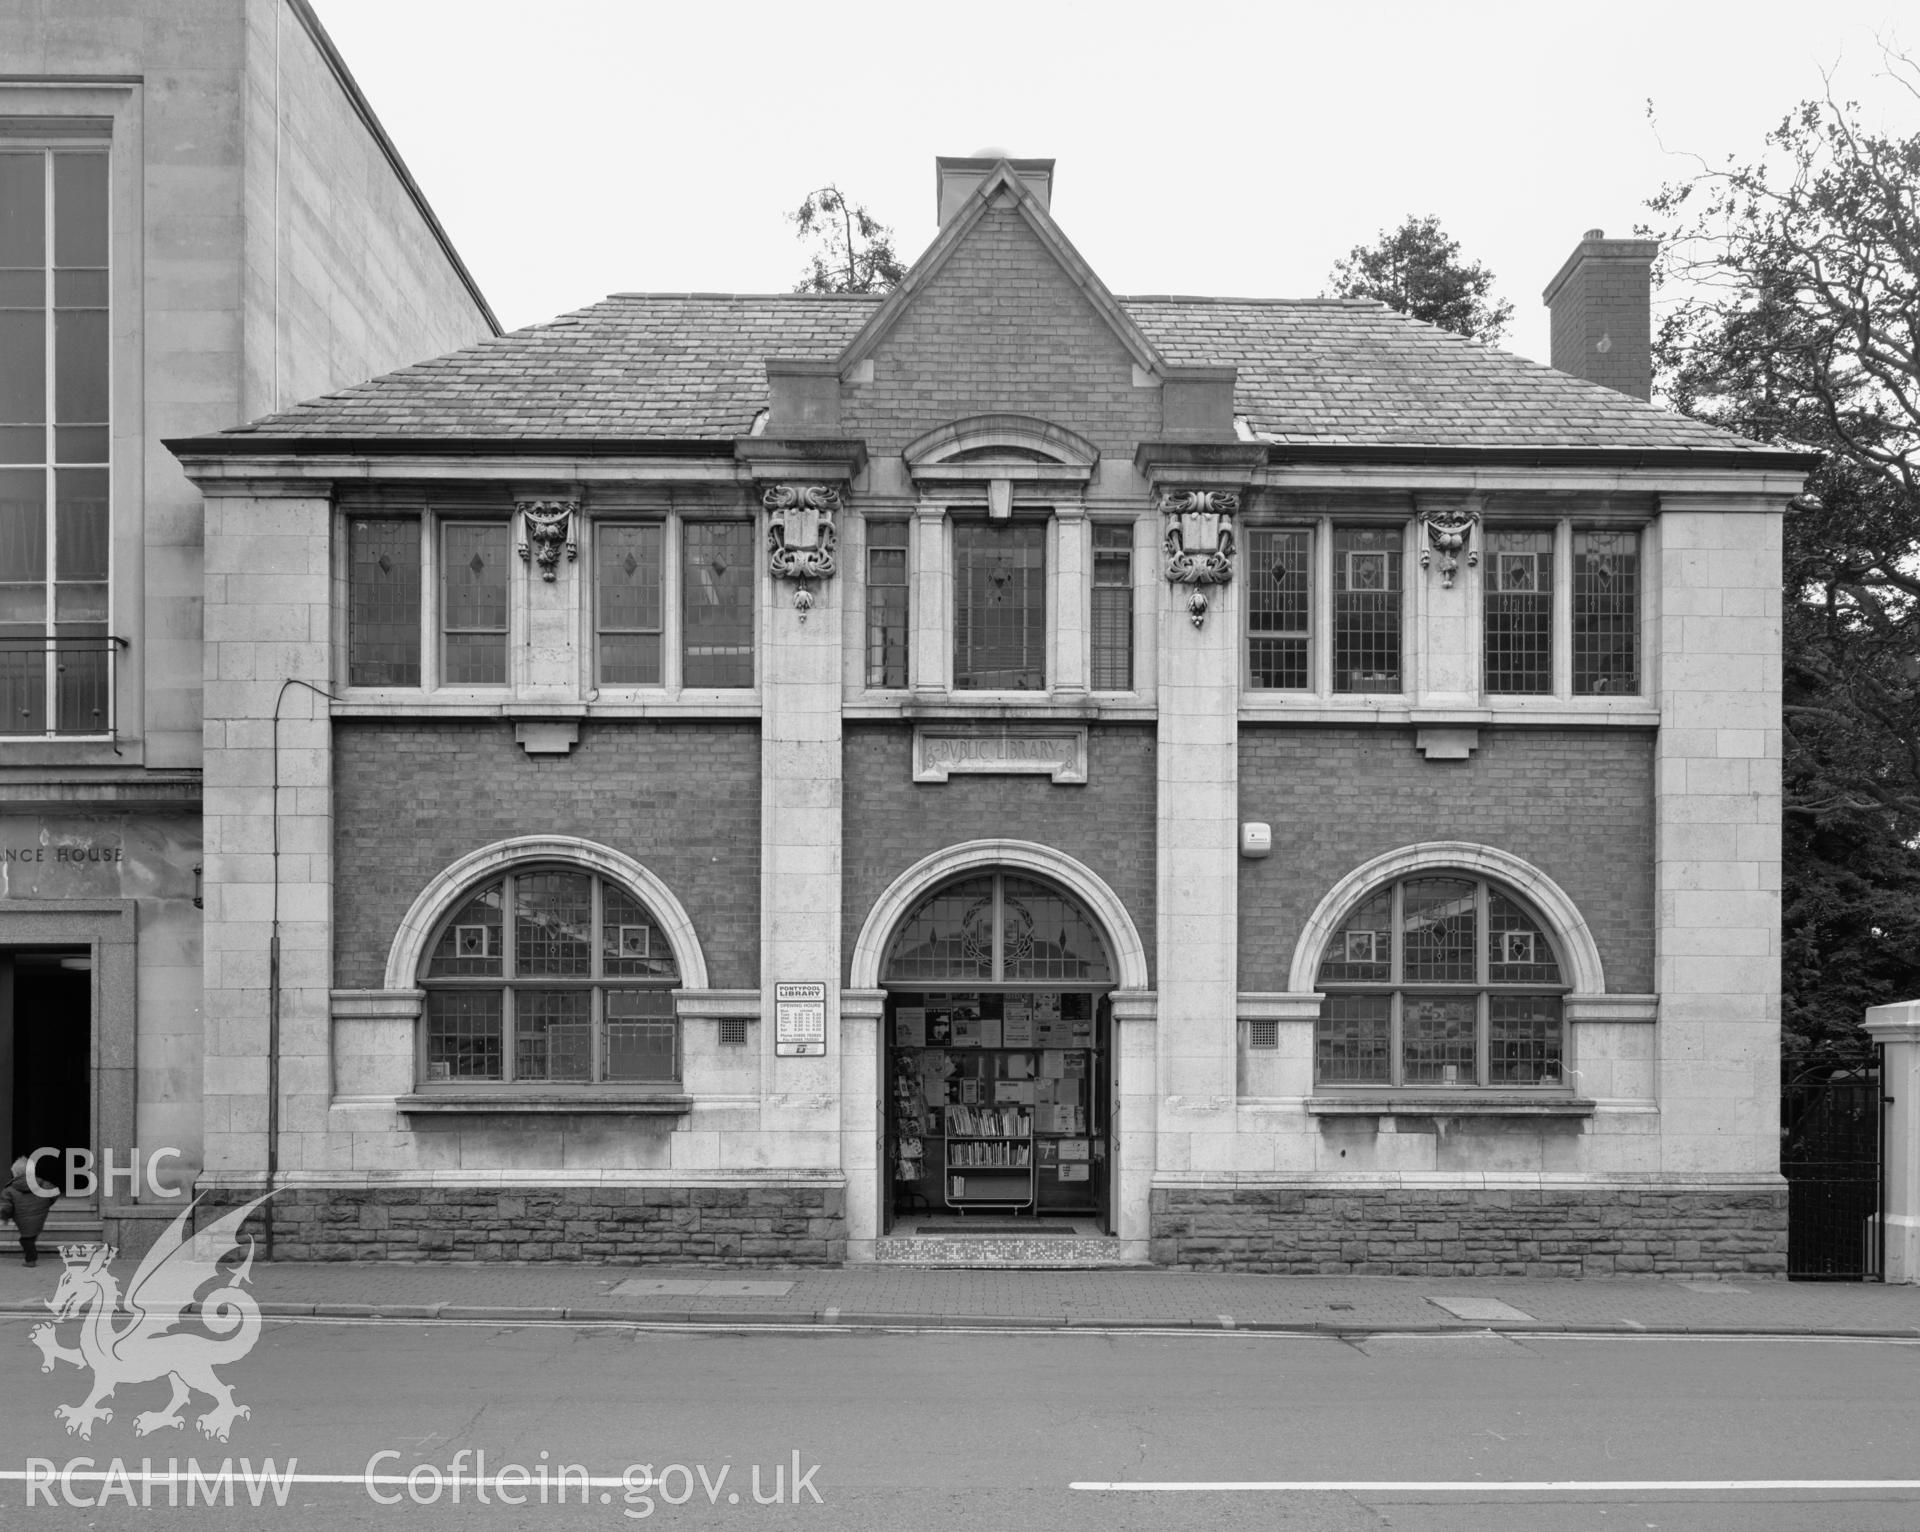 Pontypool Park Library; Two B&W photos taken by Iain Wright, 11th June 1998, negatives held. Produced for the "Buildings of Wales" Monmouthshire publication.